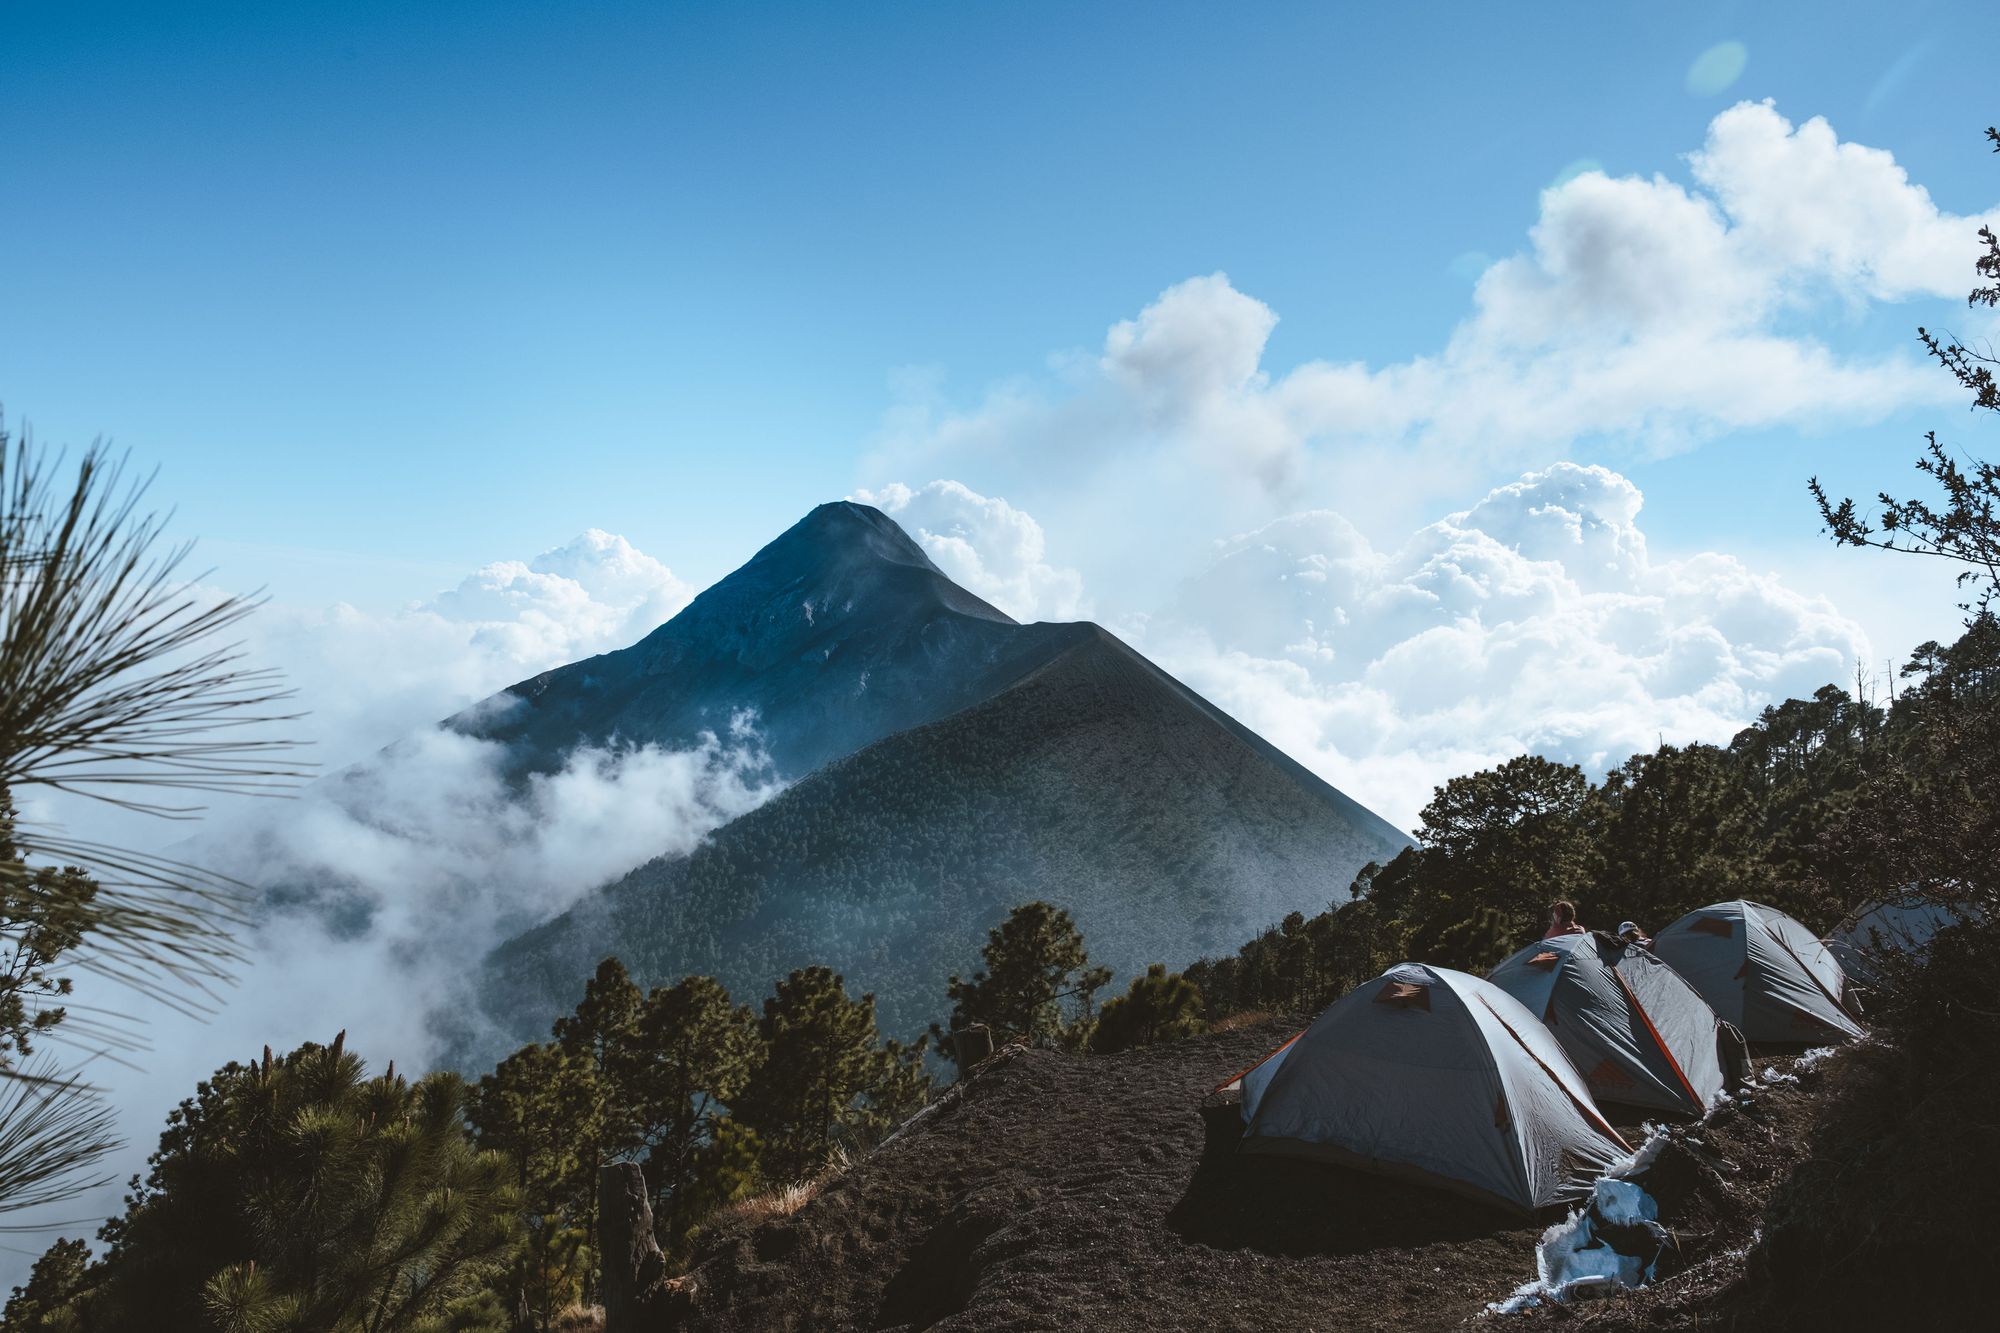 The campsite at Acatenango, with views of Fuego. Photo: Old Town Outfitters.